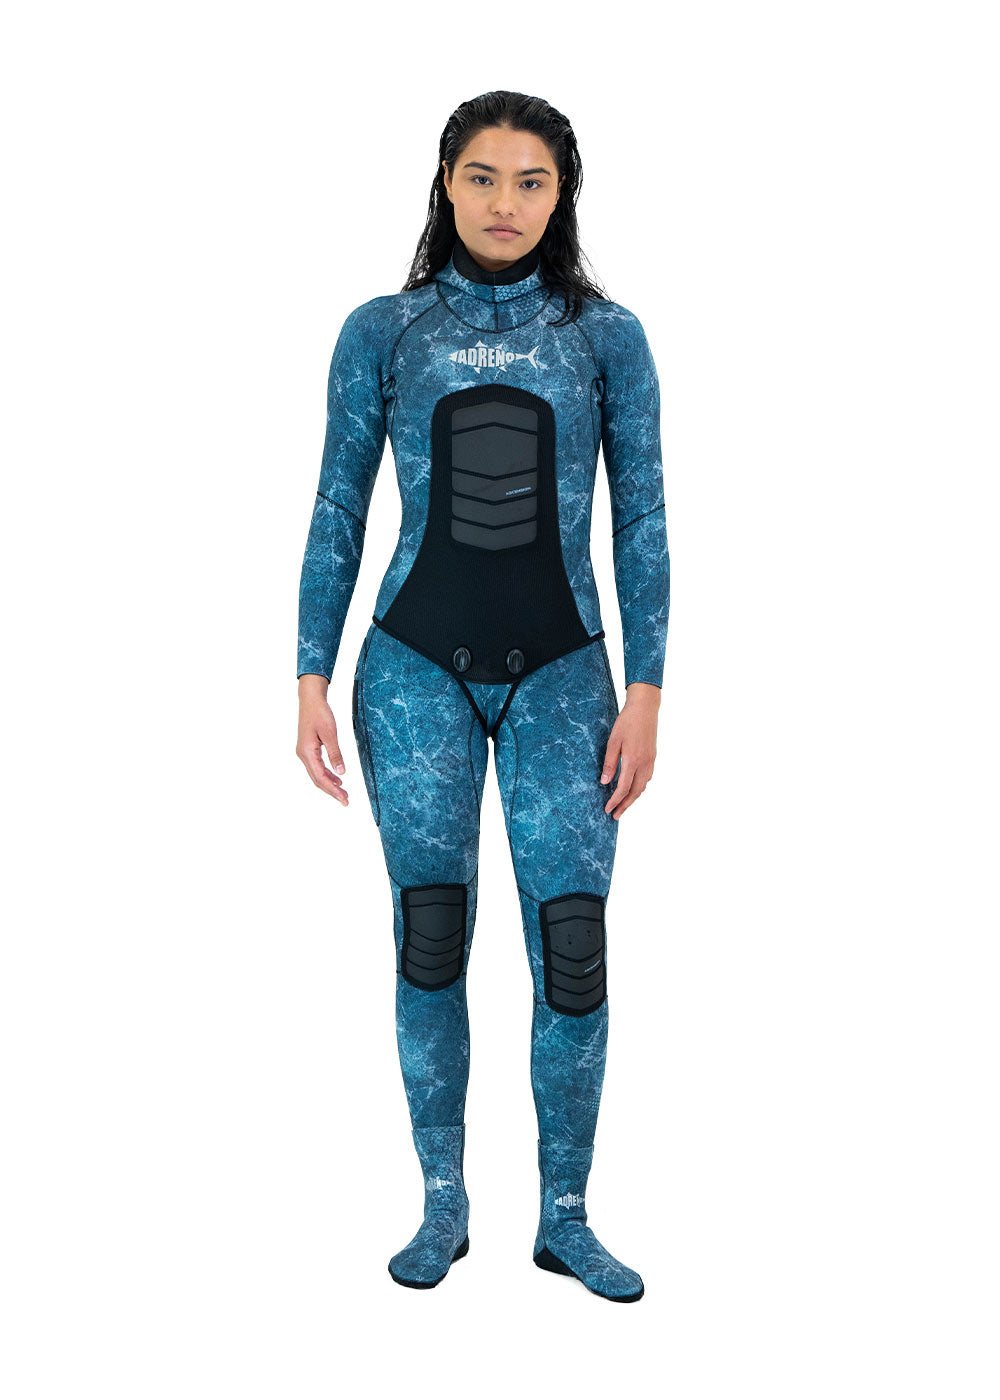 20% Off Almost All Spearfishing Wetsuits Sale